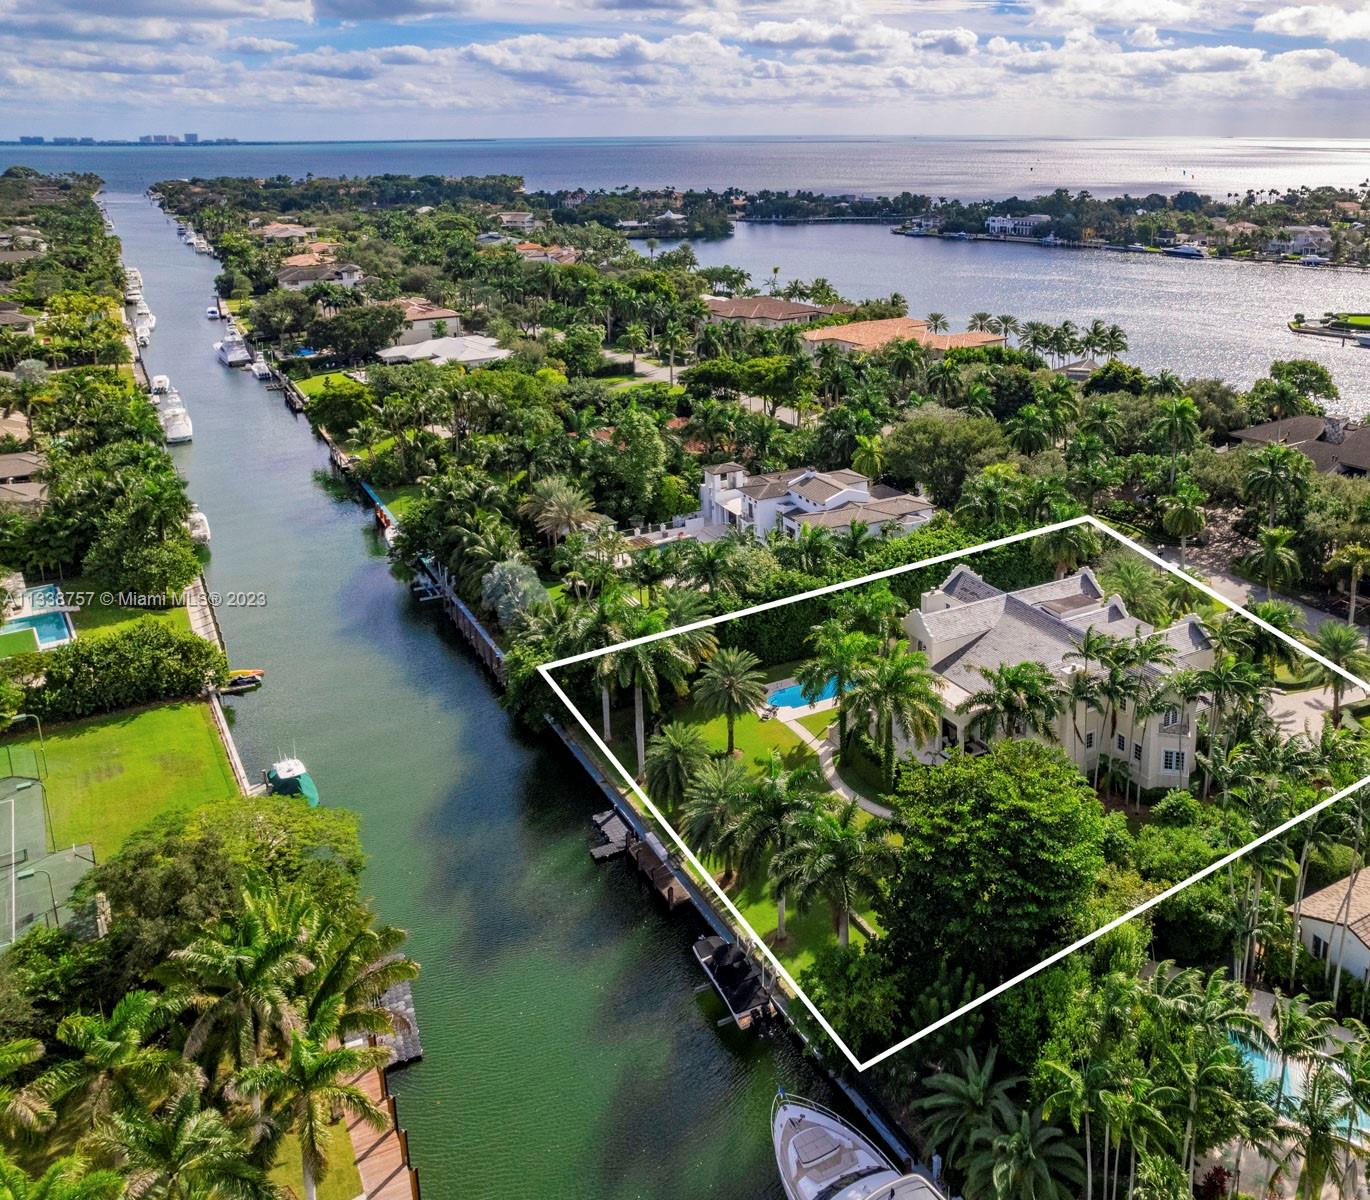 585 Arvida Parkway is a spectacular 12,102 Sq.Ft. waterfront residence on beautifully landscaped grounds in the prestigious community of Gables Estates. Featuring east and west wings, the exterior facade melds Dutch and Island influences. The elegant interiors include double height ceilings, stunning living and formal dining rooms, and chef's kitchen with Gaggenau appliances and breakfast area. The main suite has a luxurious marble bath with a long-mirrored vanity, jacuzzi and multi-jet shower, and two walk-in closets. Other special features include an elevator, family room, library, two fireplaces and 4-car garage. The resort-style outdoors have covered terraces, a pool and 180 feet of waterfront, with direct access and no bridges to Biscayne Bay.